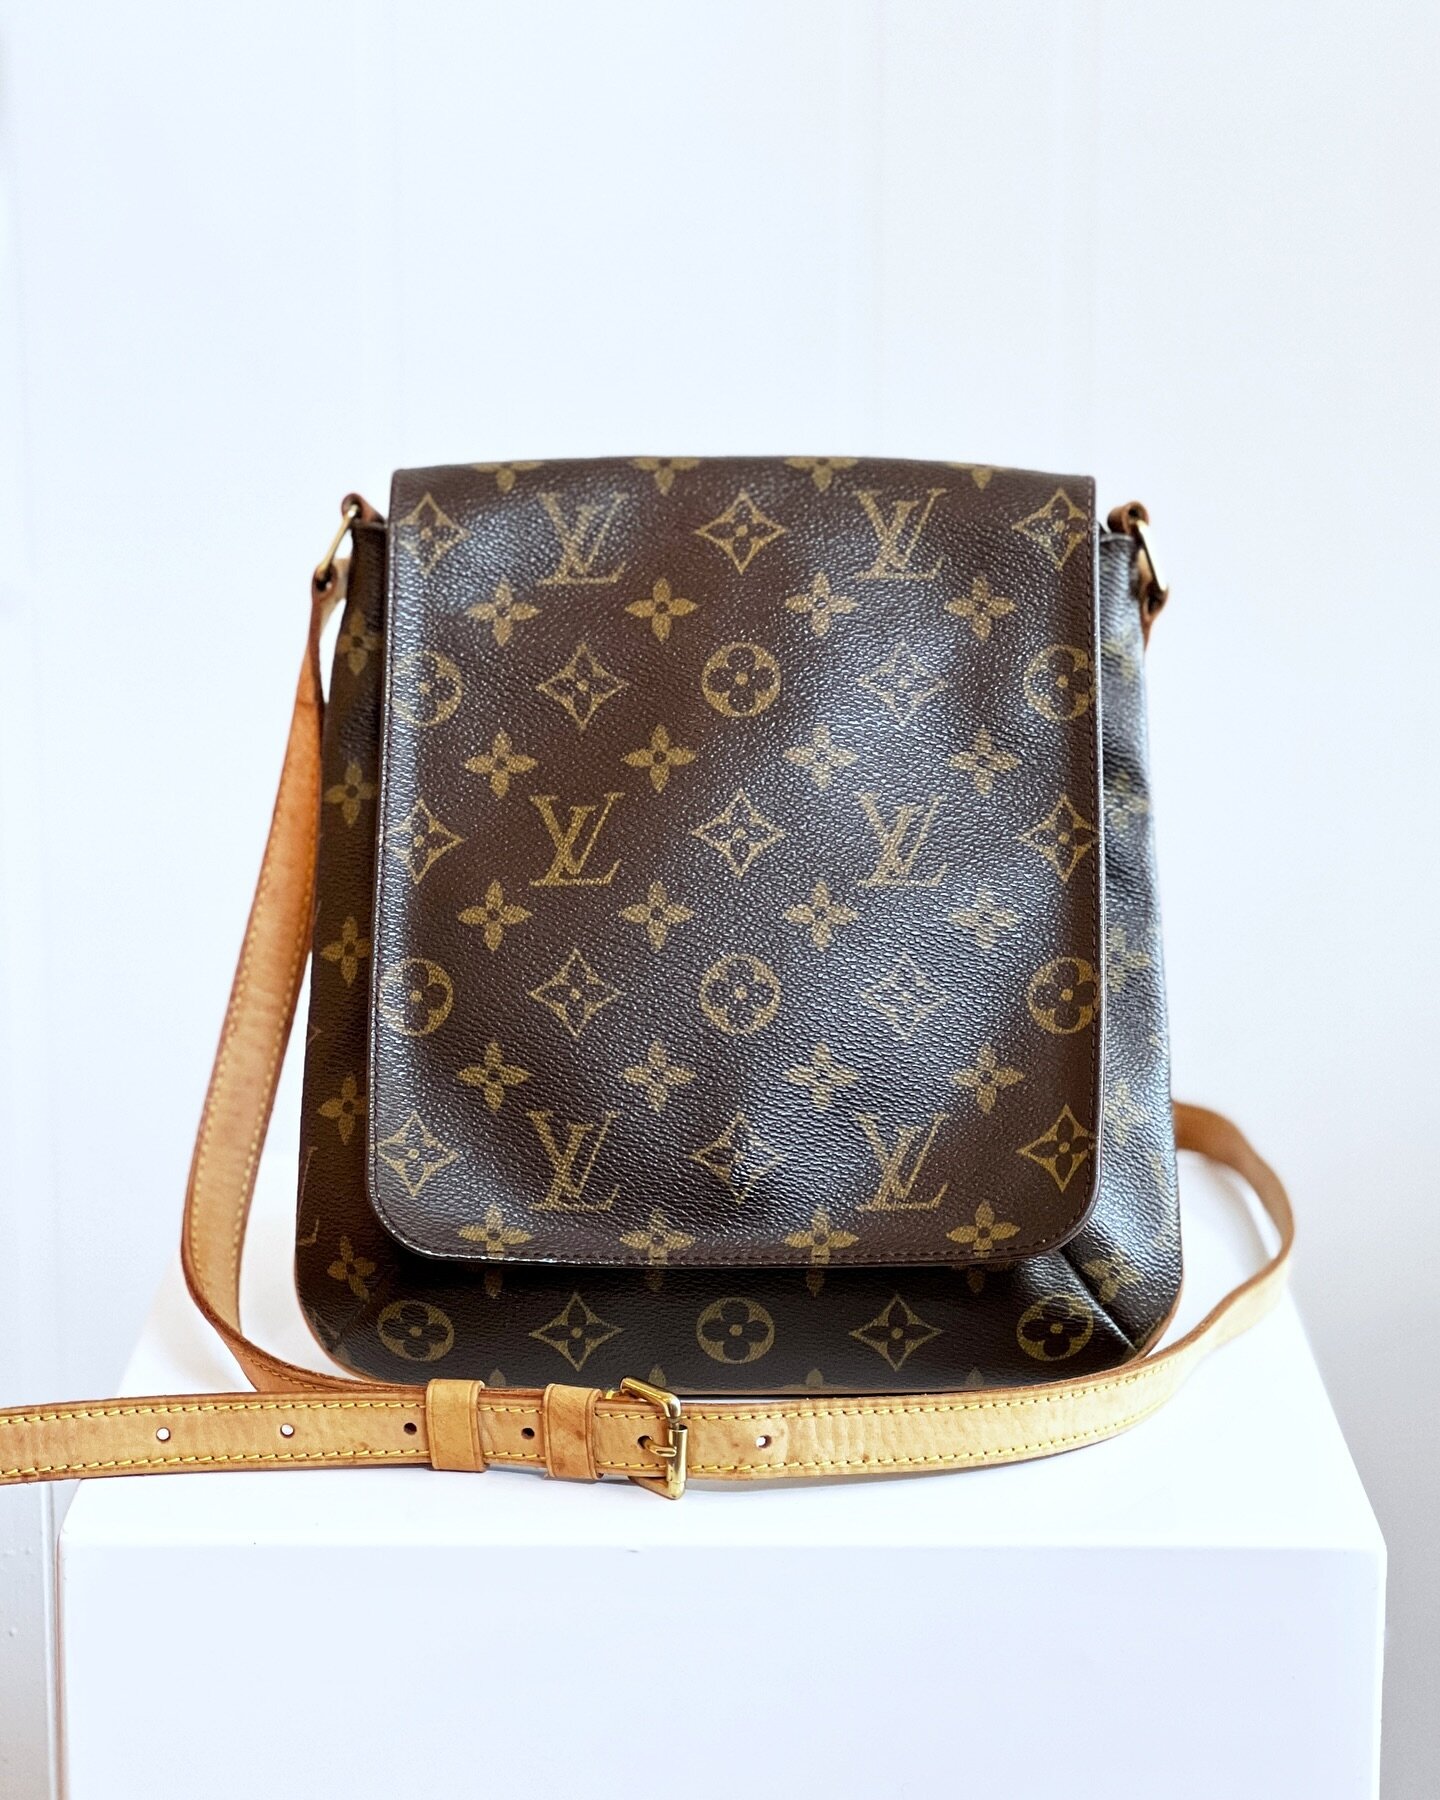 New bag alert!
Louis Vuitton Salsa Crossbody 
Shop in store or on our website!
.
.
.
#shopsmall #shoplocal #Connecticut #shopconsignment #guilfordct #womenownedbusiness #marijaneboutique #connecticutbusiness #connecticutboutique #retailtherapy #bouti